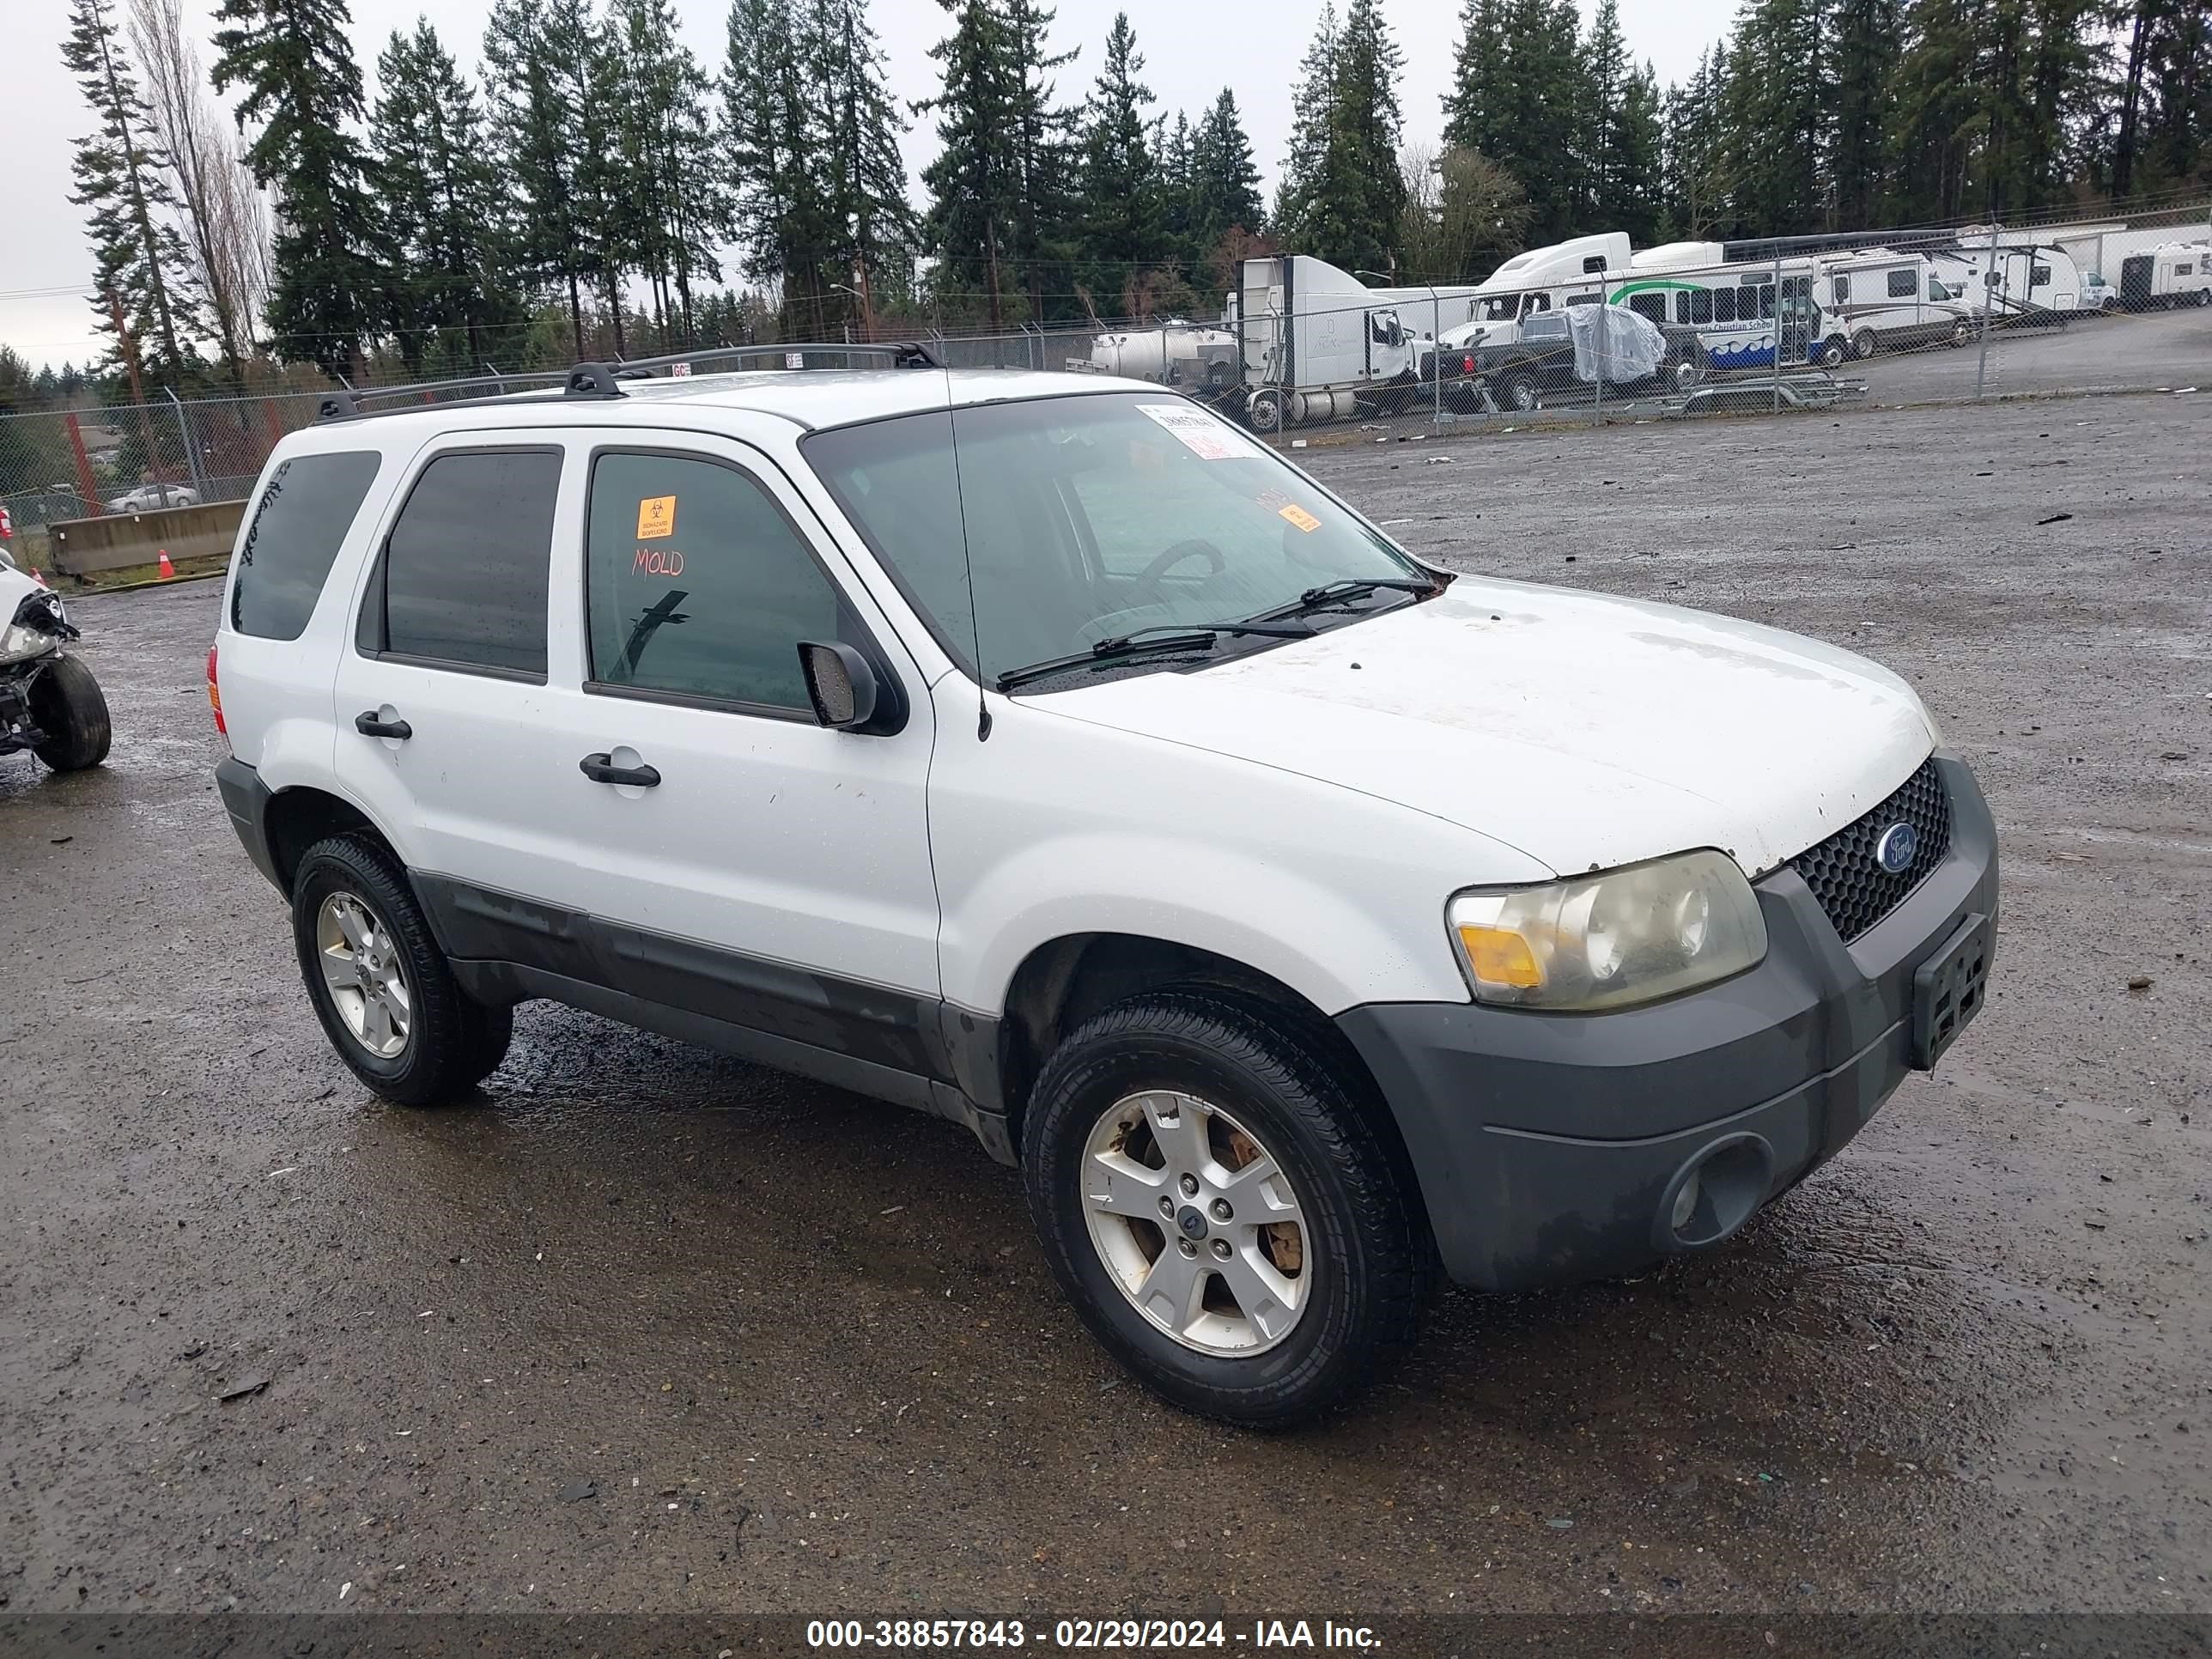 vin: 1FMYU93135KC27867 1FMYU93135KC27867 2005 ford escape 3000 for Sale in 98374, 15801 110Th Ave E, Puyallup, Washington, USA